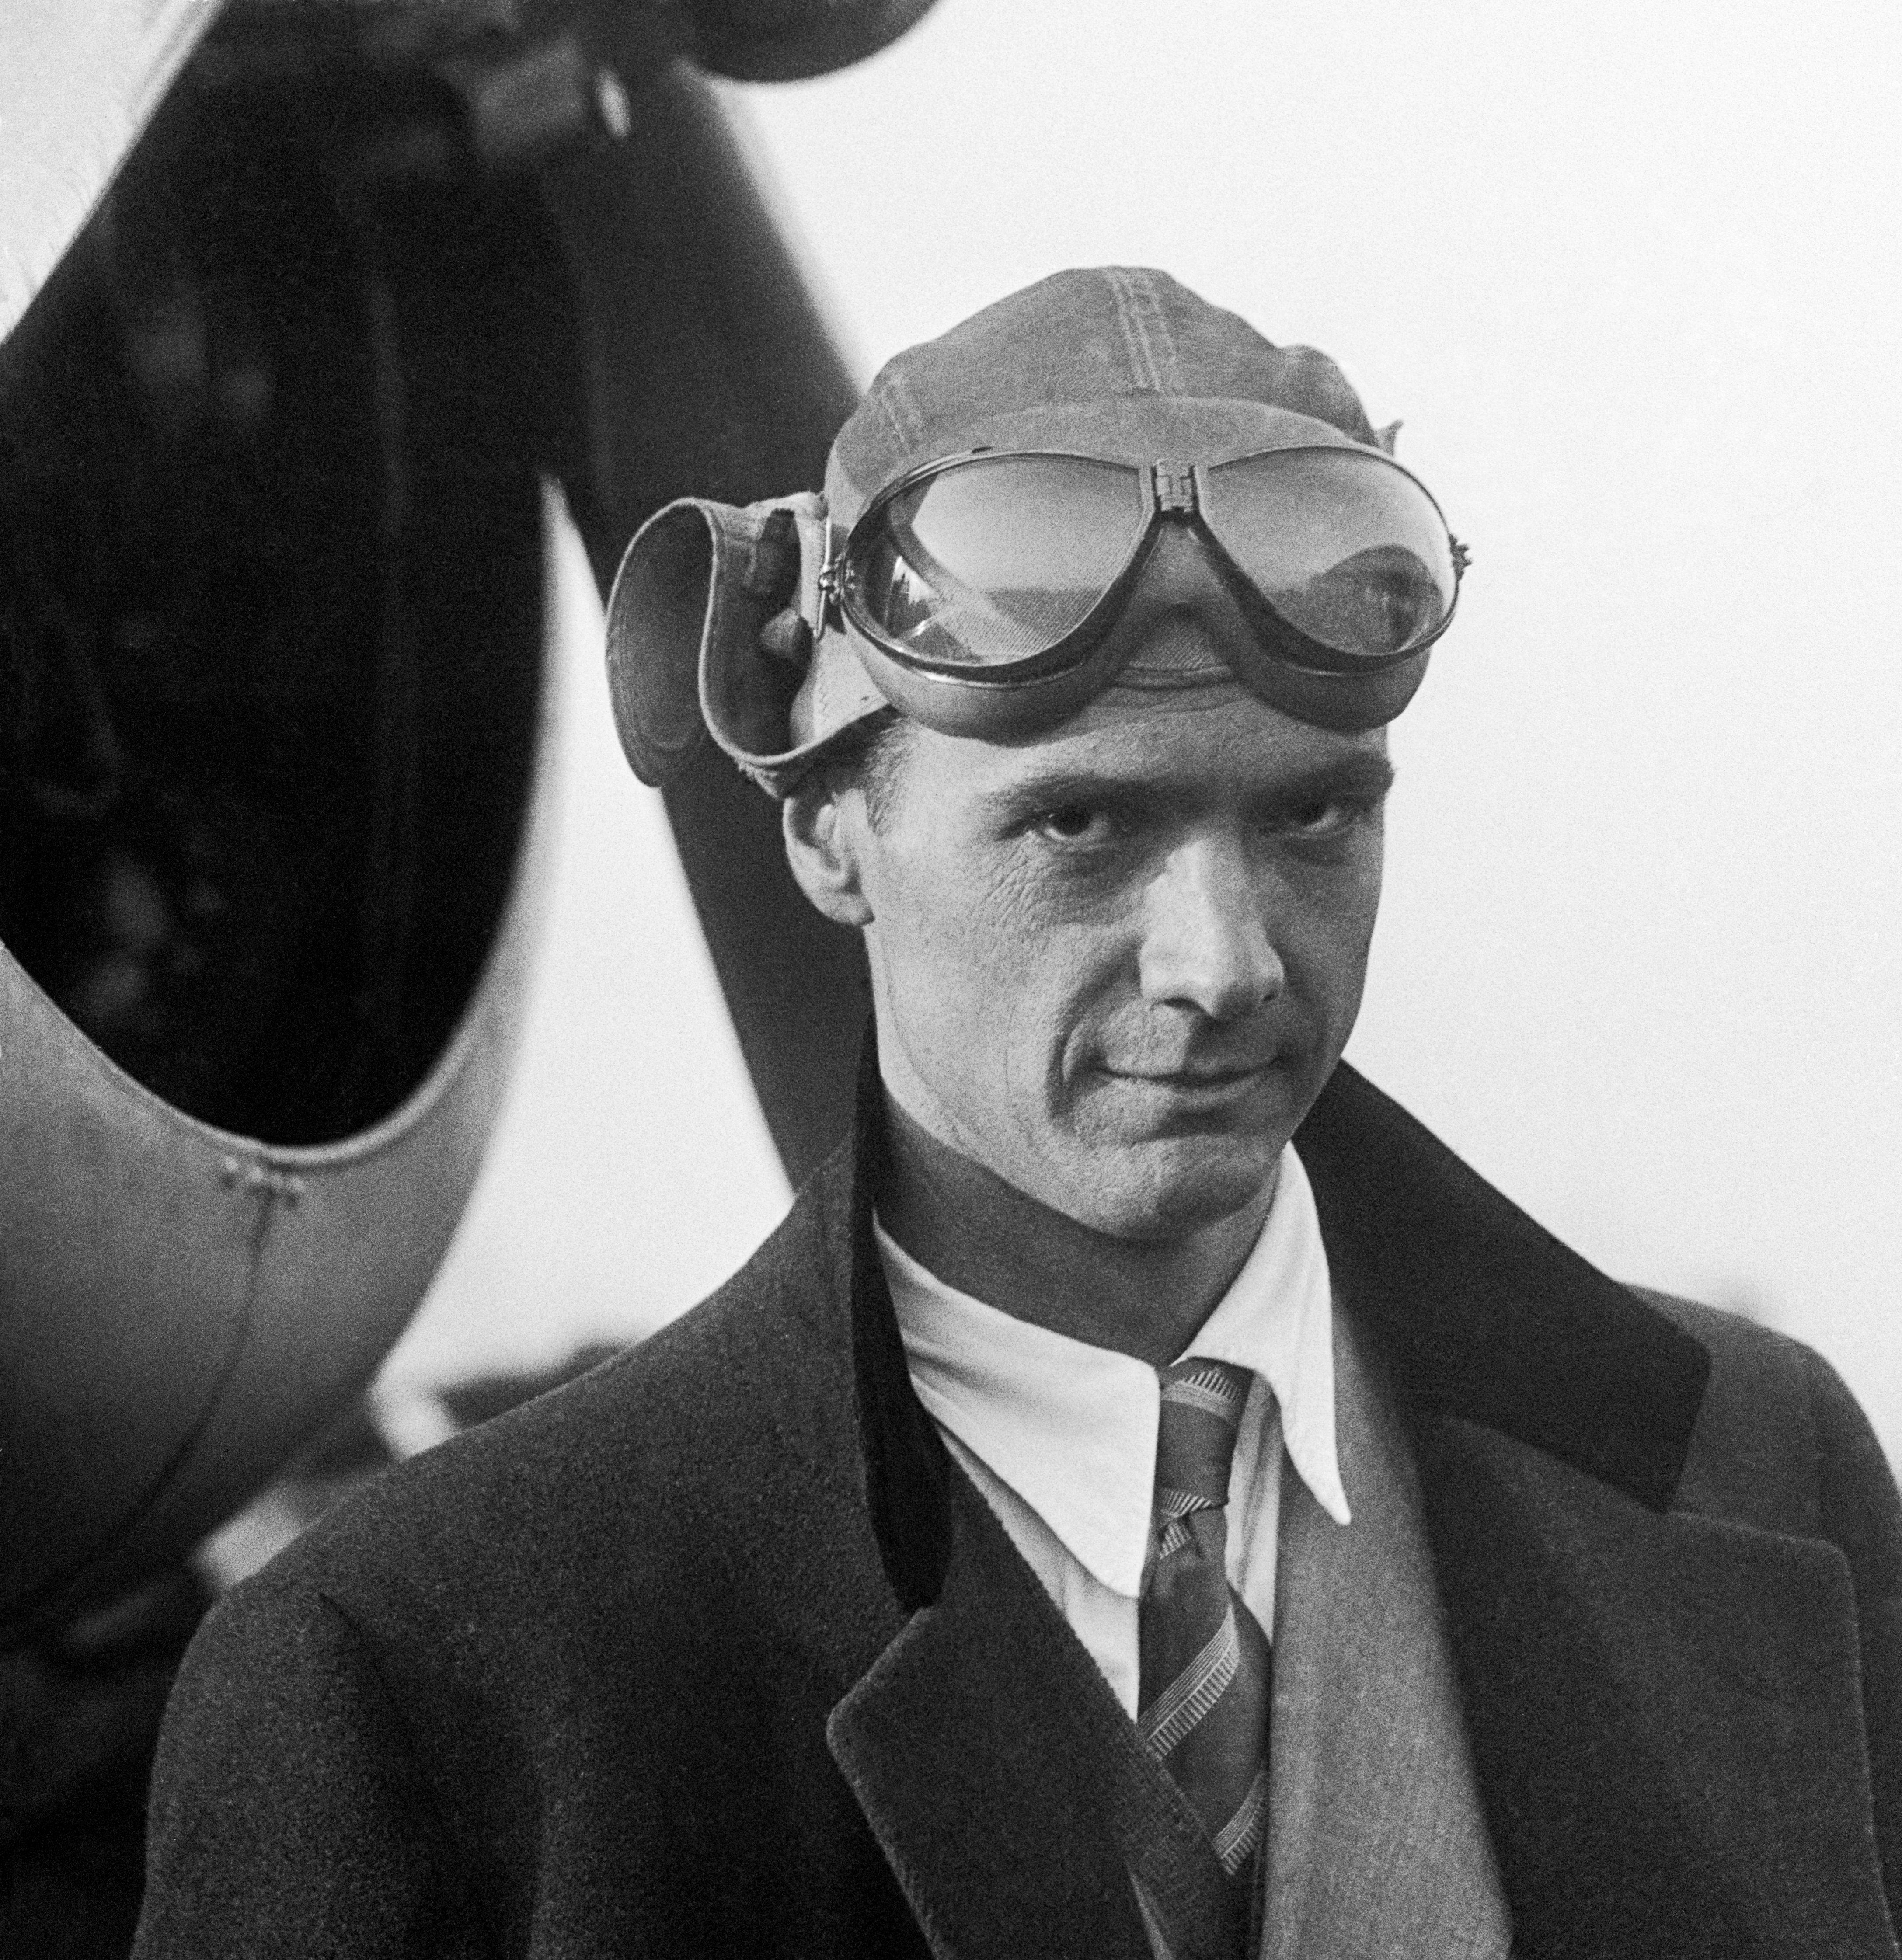 Eccentric millionaire pilot and engineer Howard Hughes | Source: Getty Images